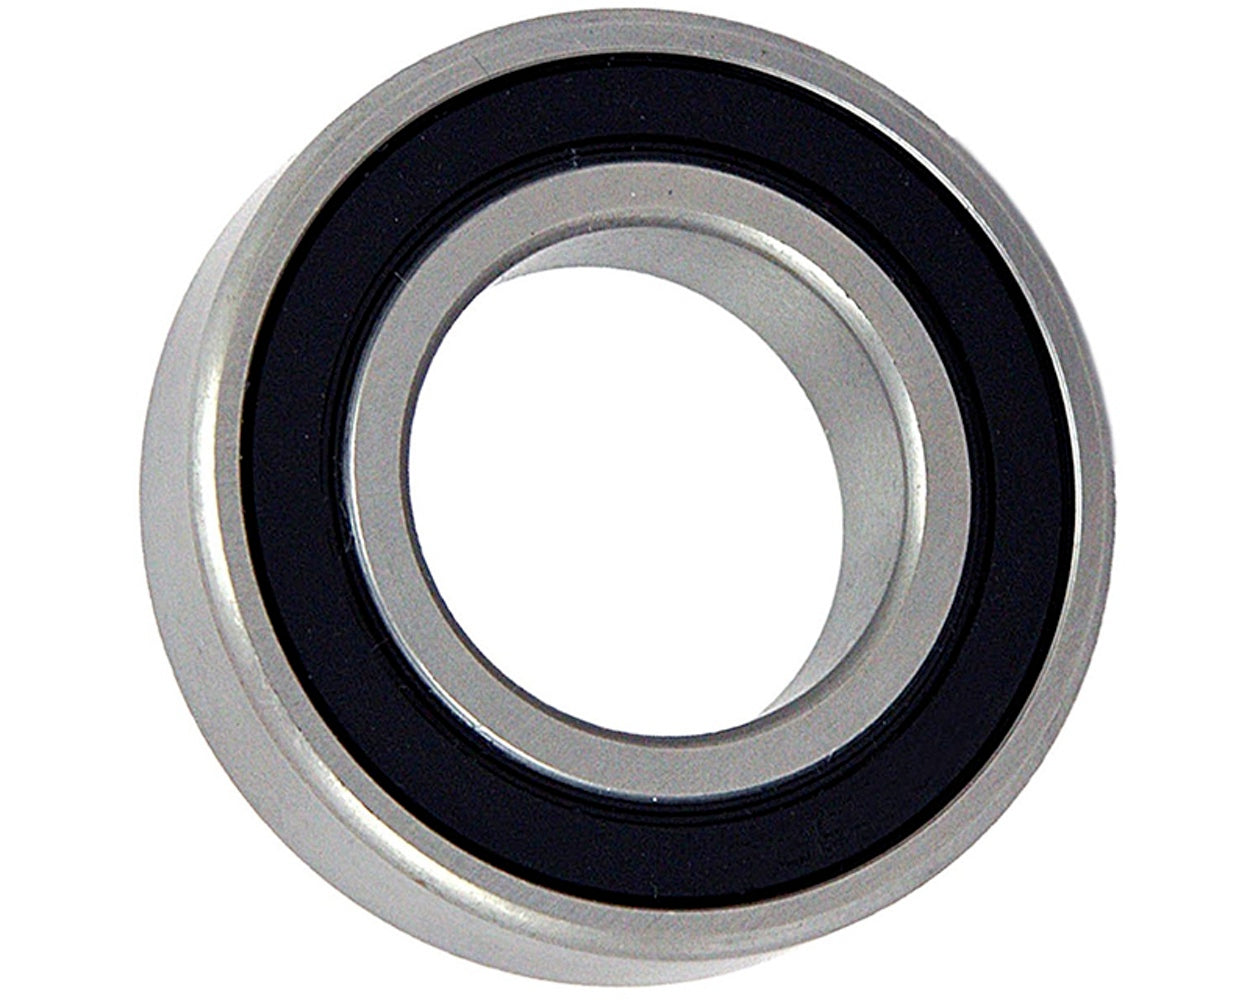 Wheel Bearing 6004 - 20mm x 42mm With Rubber Shield